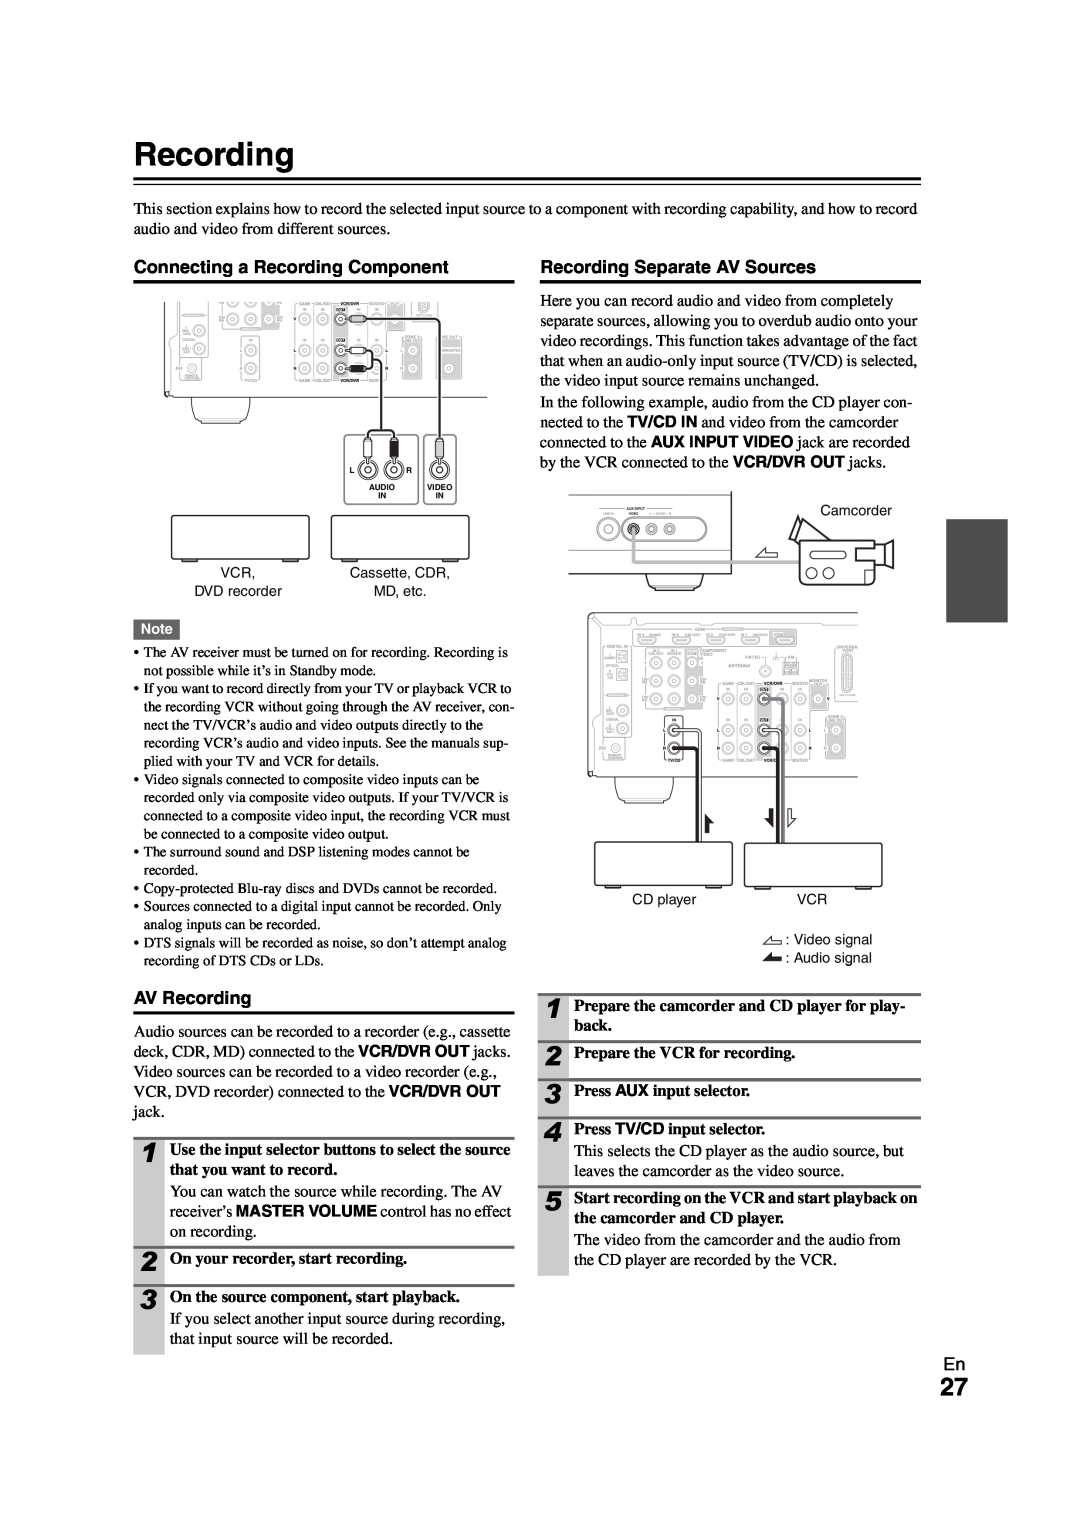 Onkyo HT-S5300 instruction manual Connecting a Recording Component, Recording Separate AV Sources, AV Recording 